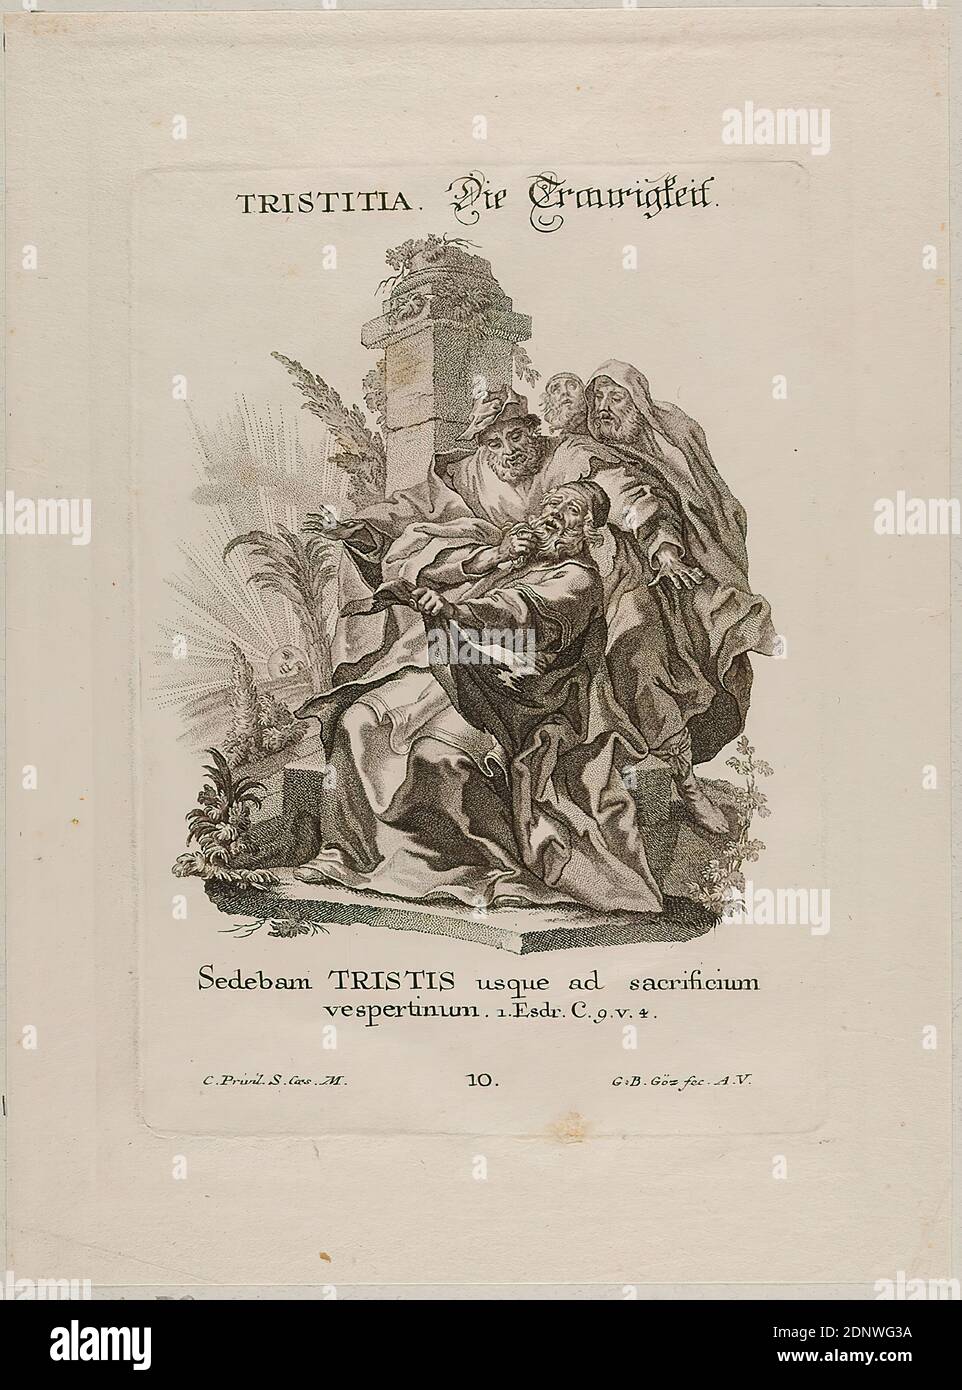 Gottfried Bernhard Göz, Die Traurigkeit, Punktiermanier, sheet size: height: 23,20 cm; width: 17,20 cm, signed, inscribed and numbered on the plate: TRISTITIA. Die Traurigkeit, Sedebam TRISTIS usque ad sacrificium vespertinum 1 Esdr. C. 9 V. 4, C. Privil. S. Caes. M, 10th, G. B. Göz fec. A. V, prints, printed matter, Old Testament, Rocaille, sheet 10 from the series Passiones Animi aequae bonae ac malae, figuris biblicis Penicillo The good and bad sufferers of the human mind presented in biblical stories Stock Photo